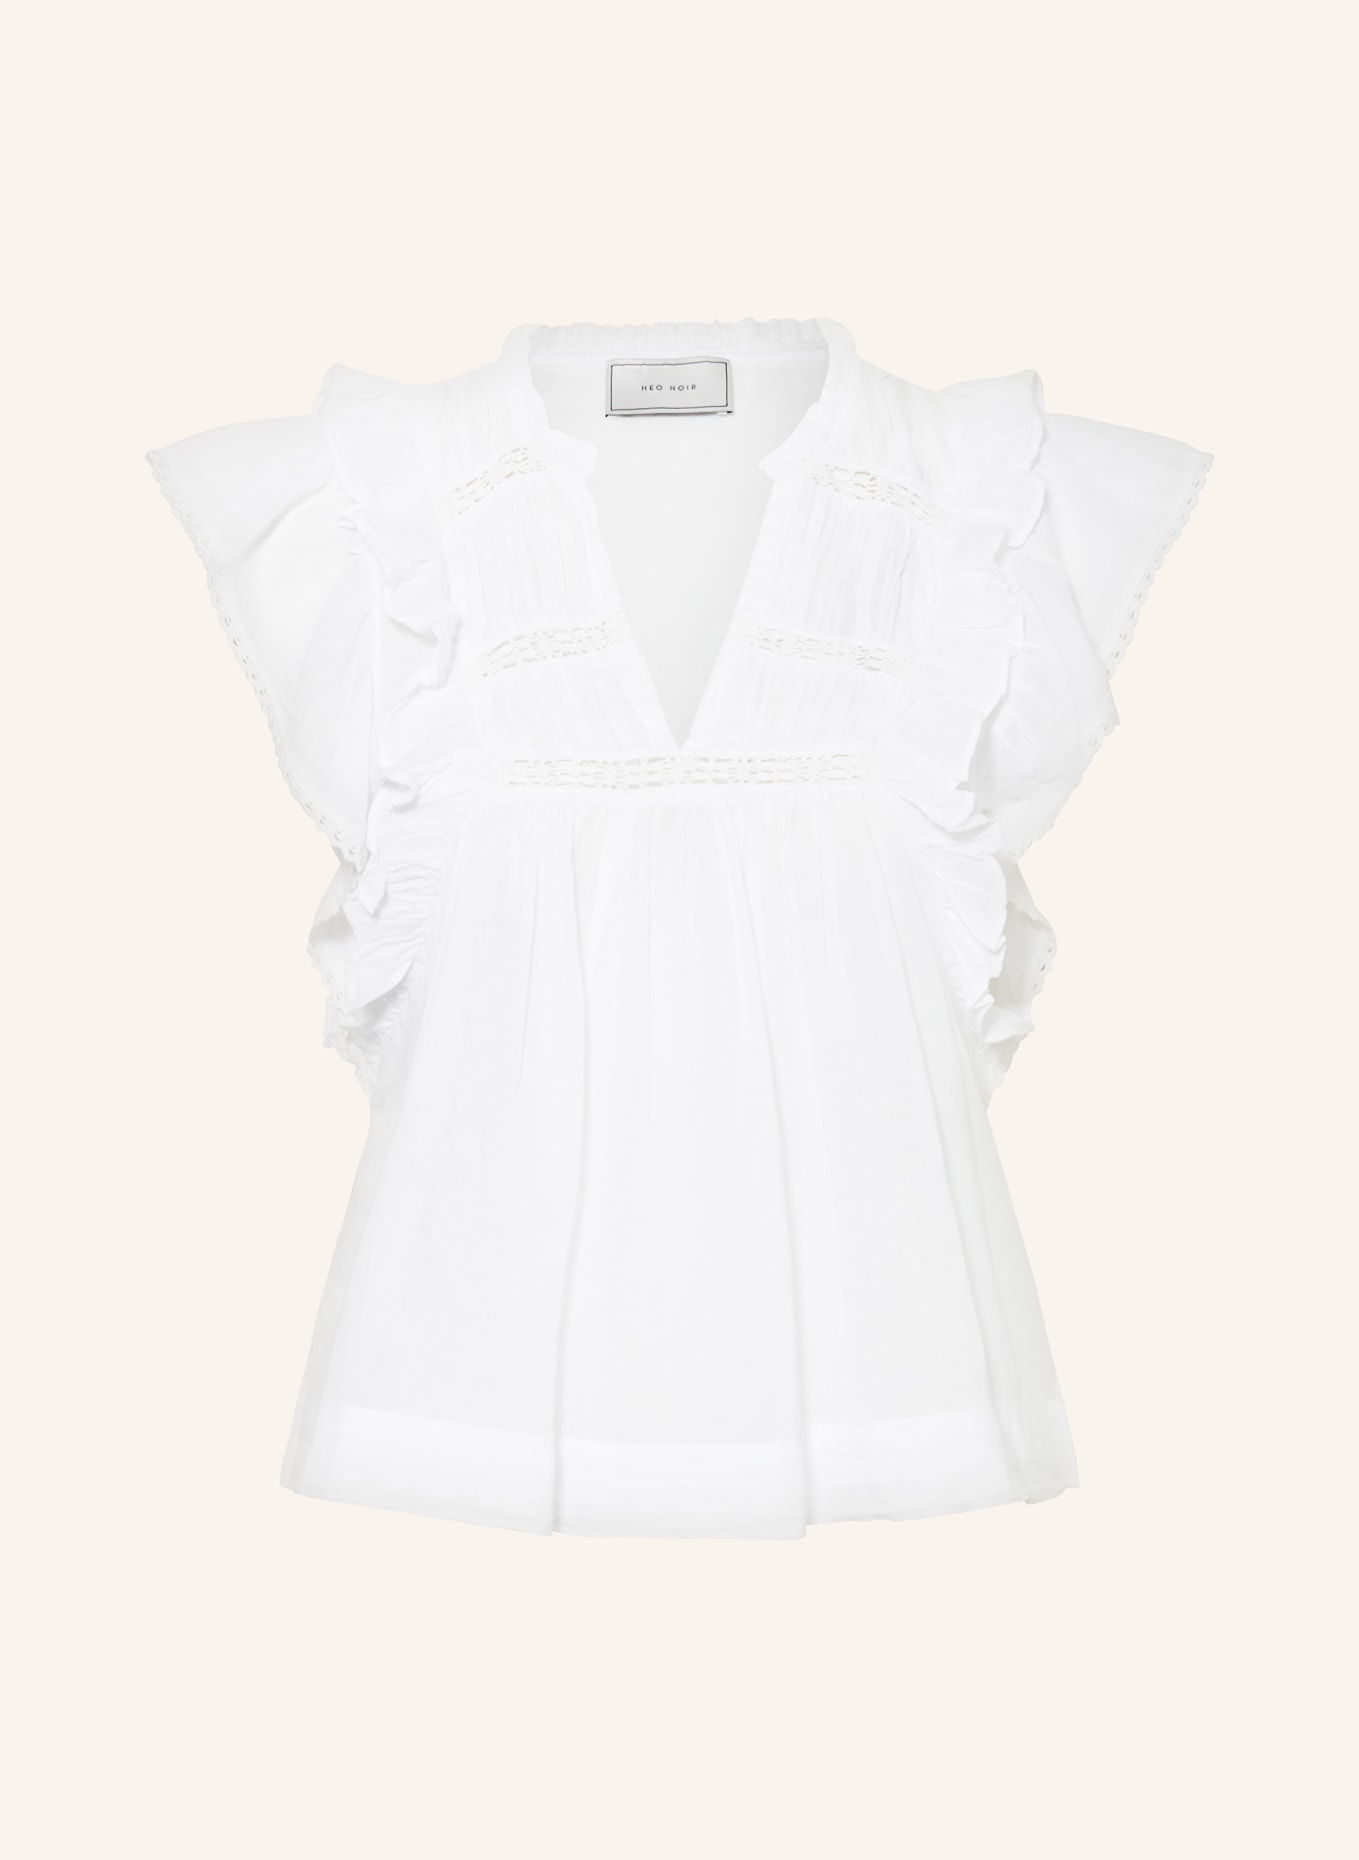 NEO NOIR Blouse top JAYLA with lace and ruffles, Color: WHITE (Image 1)